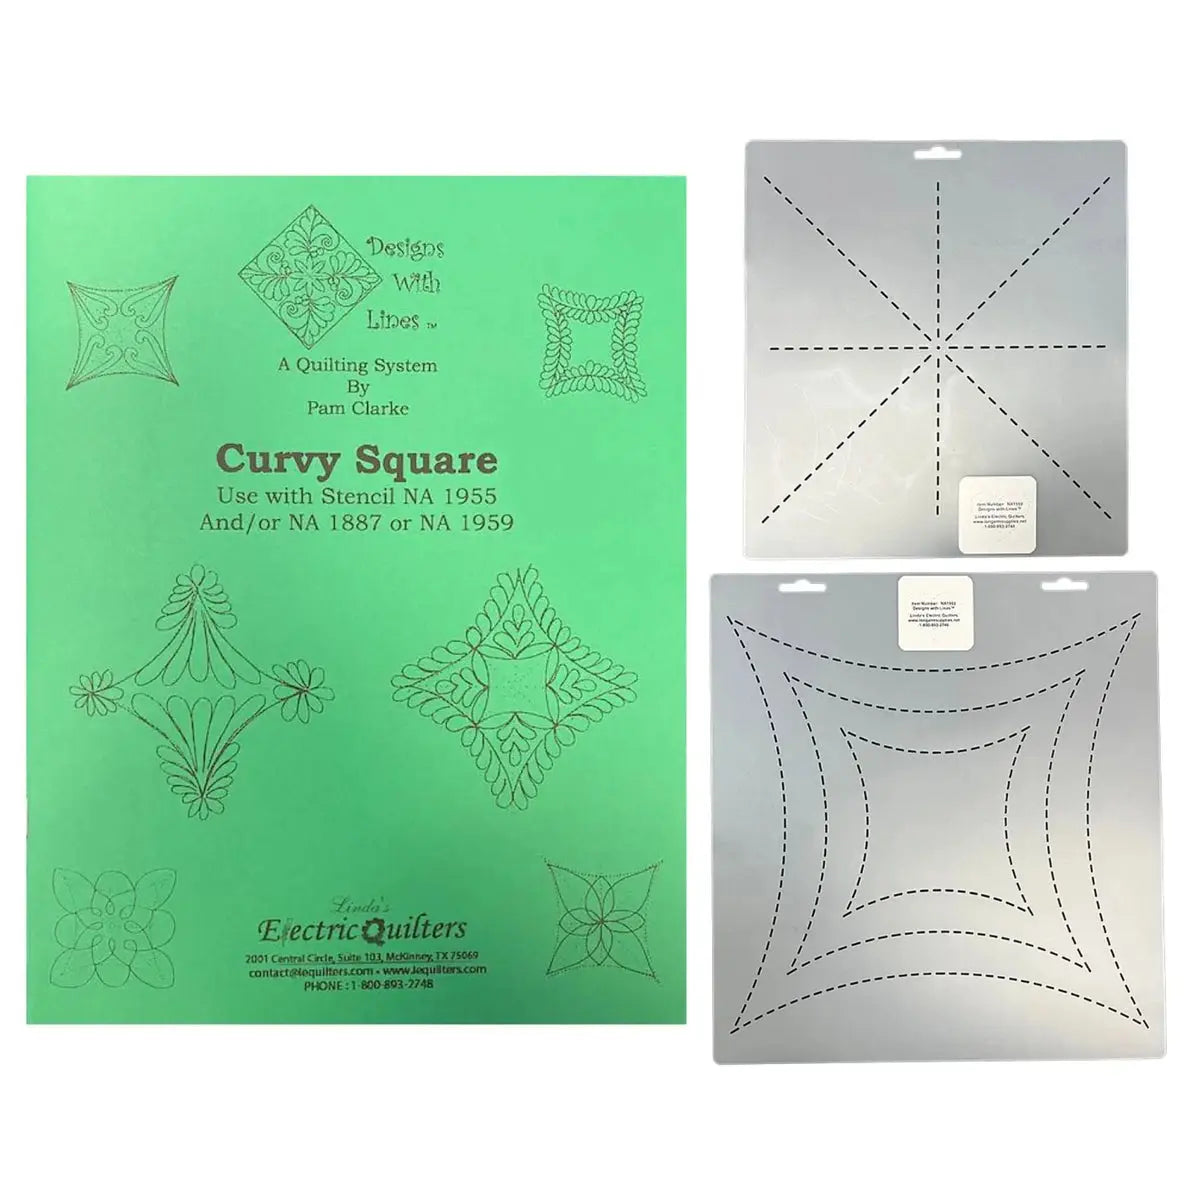 Curvy Square Book and Stencil Kit Linda's Electric Quilters